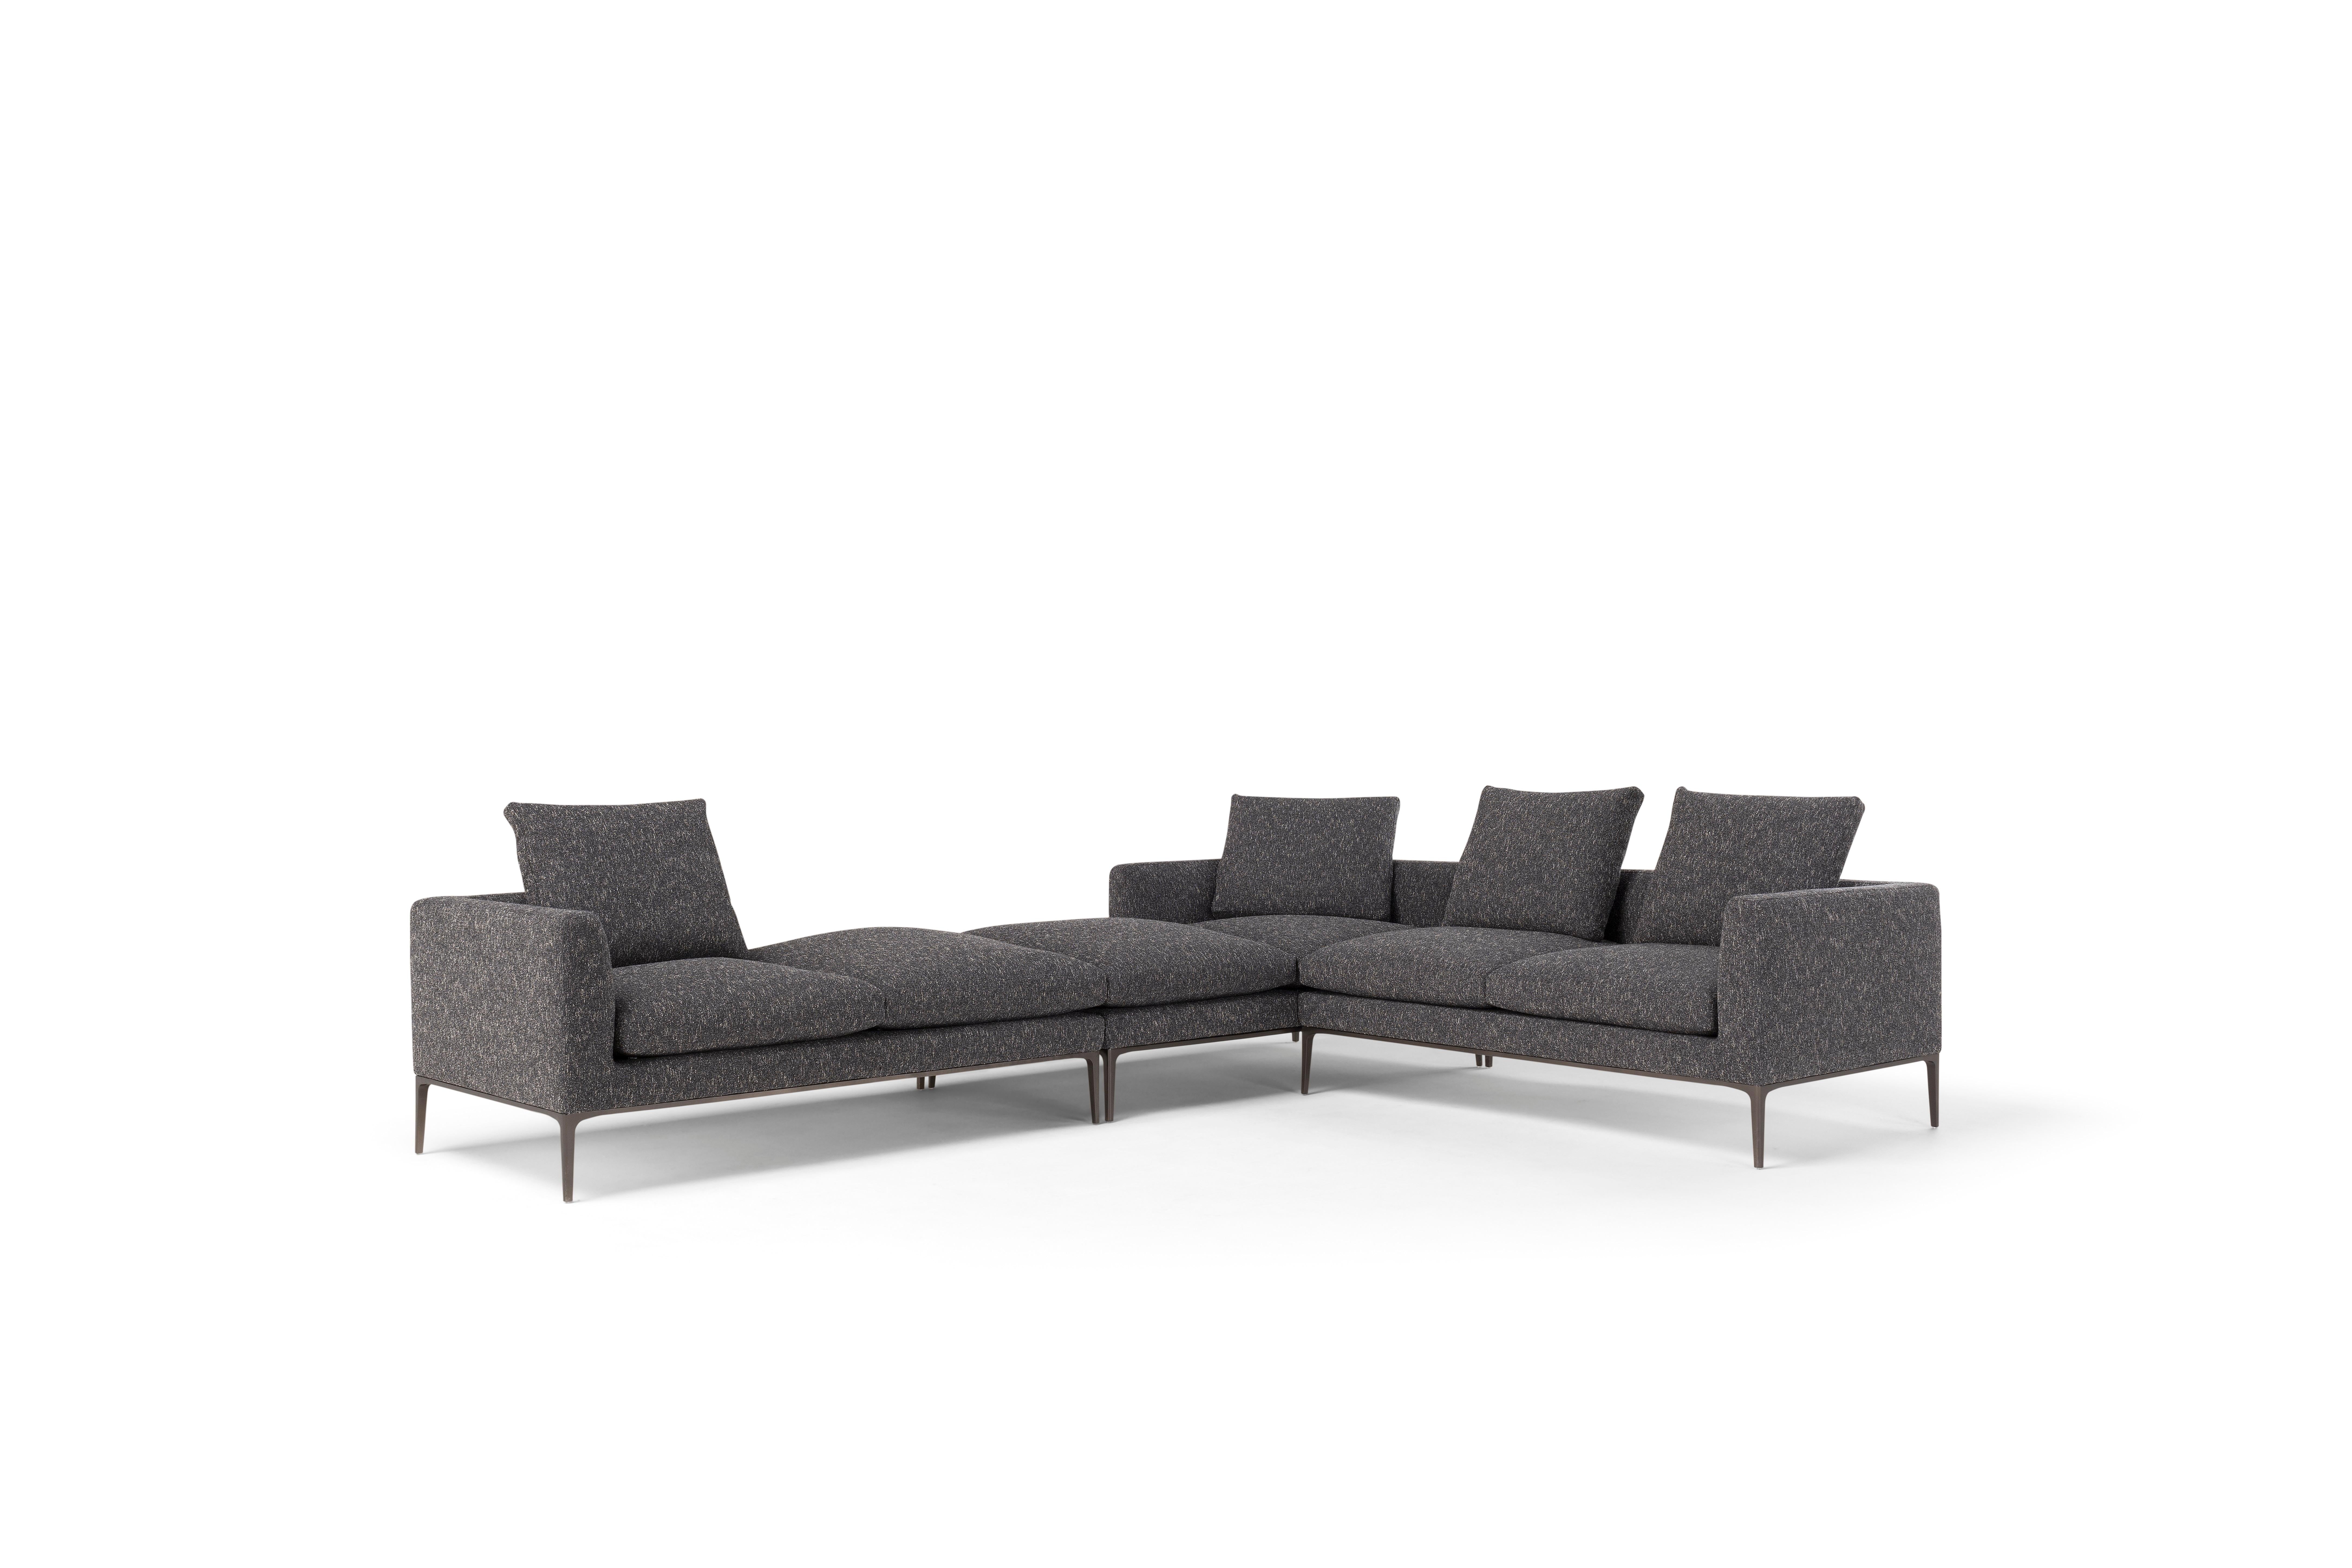 The Leonard collection is a seating system created by the defining of geometric volumes by an elegant silhouette. A continuous line draws the outline of each seat, backrest, and armrest that can accommodate soft and fluffy pillows. Utilizing a